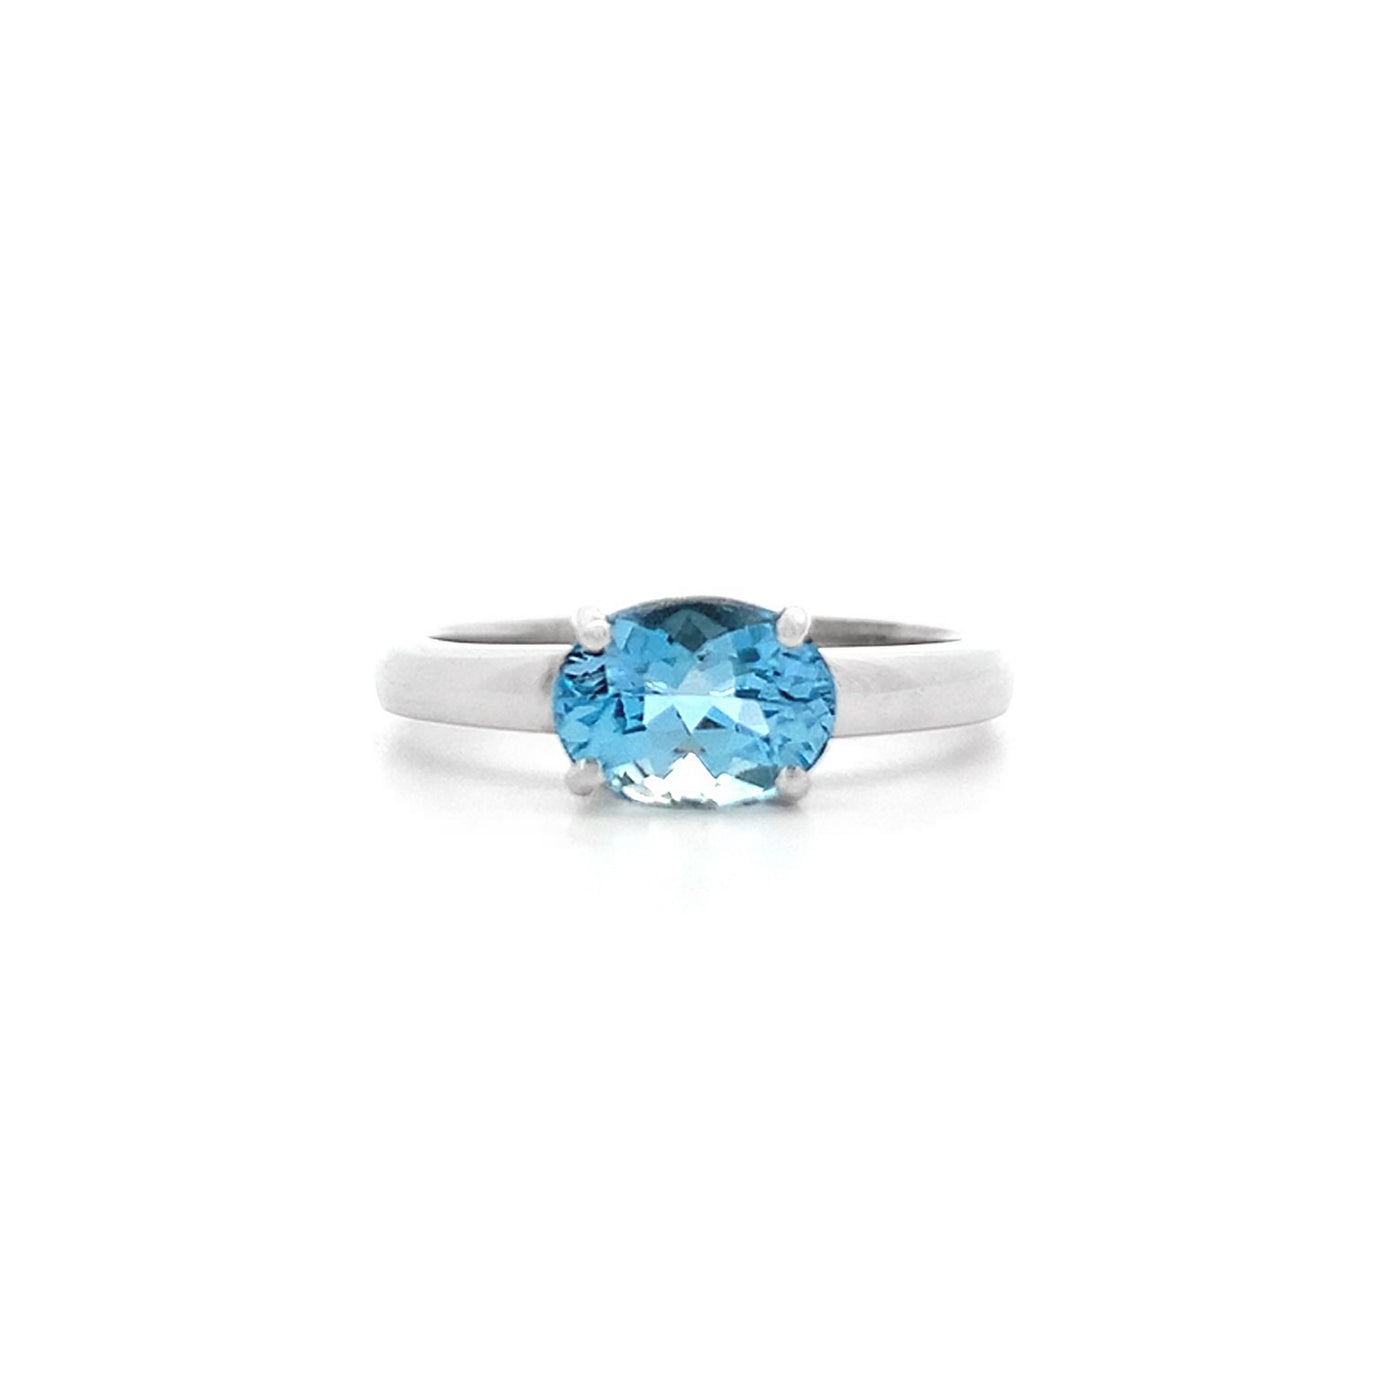 East-West Set Aquamarine Solitaire Ring in White Gold | 0.95ct